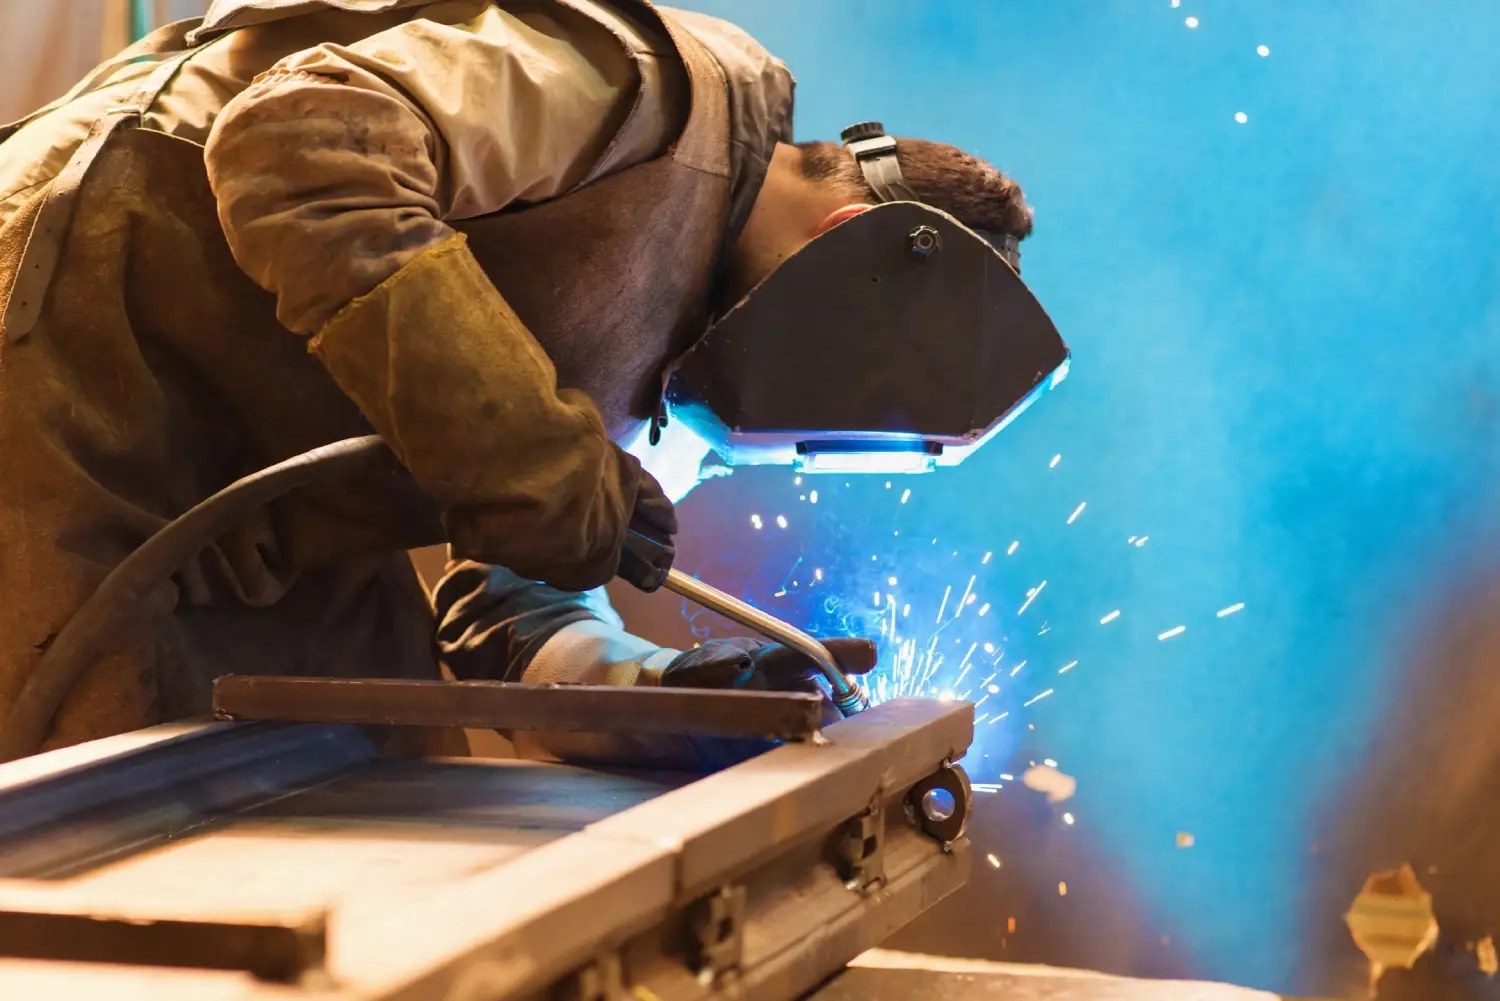 A man welding metal with blue light shining on him.